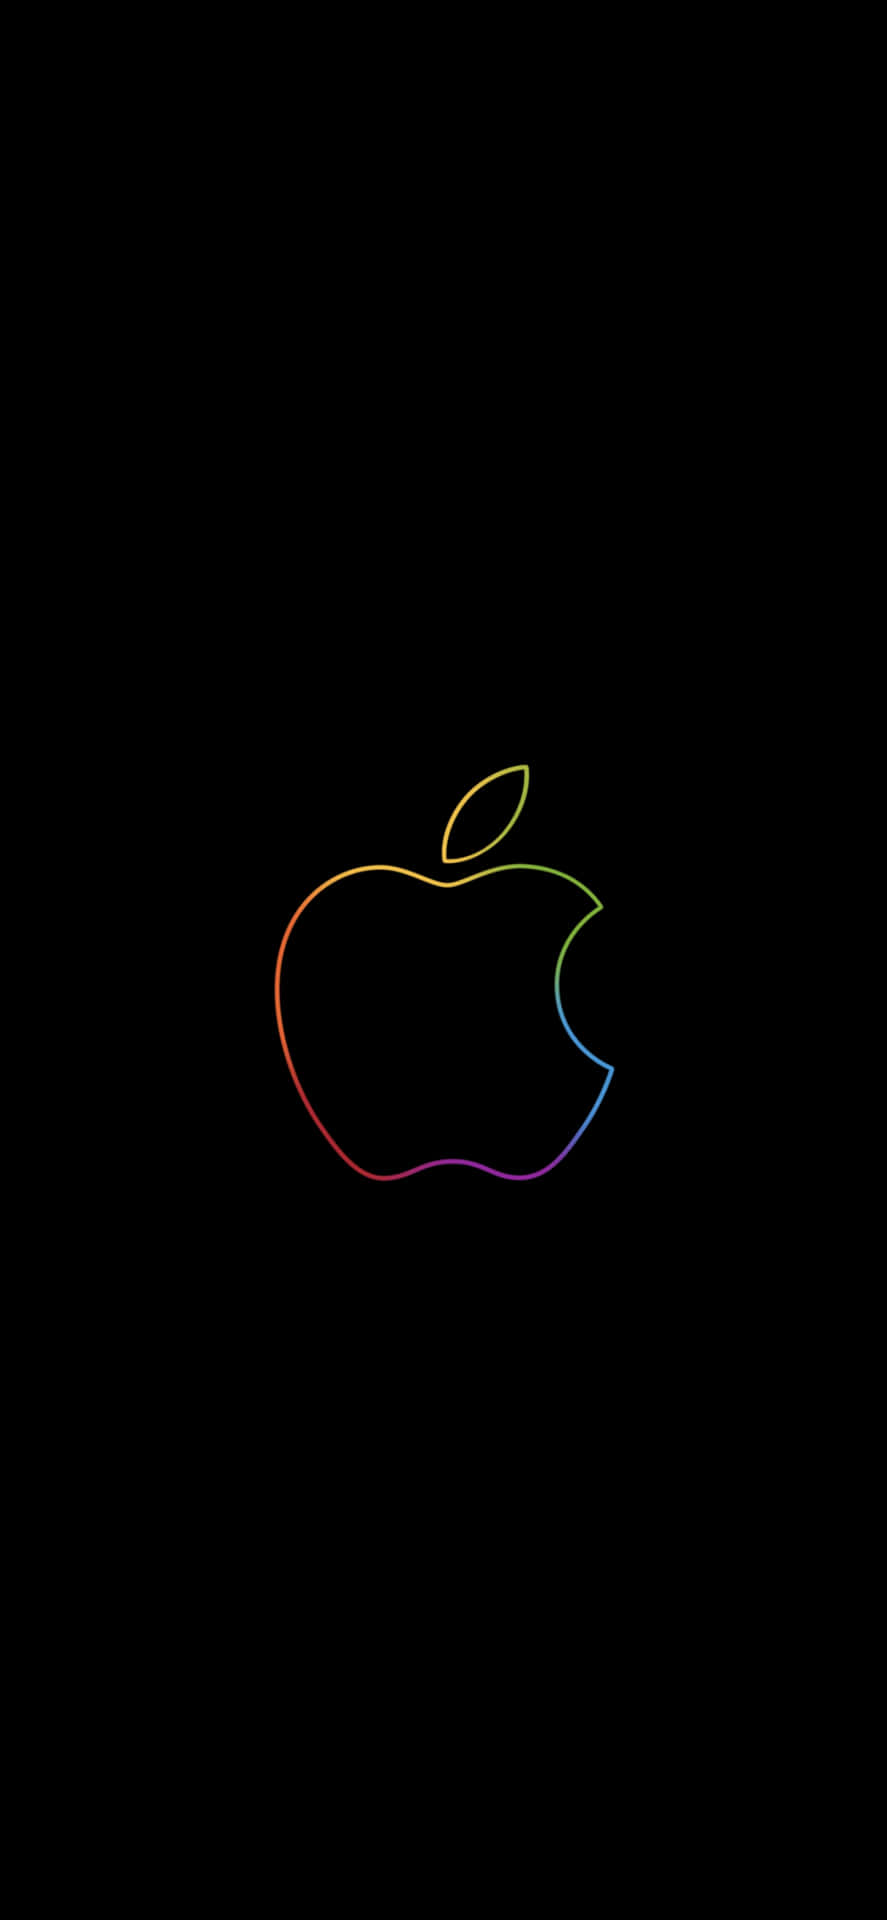 Apple logo with iPhone X background Wallpaper